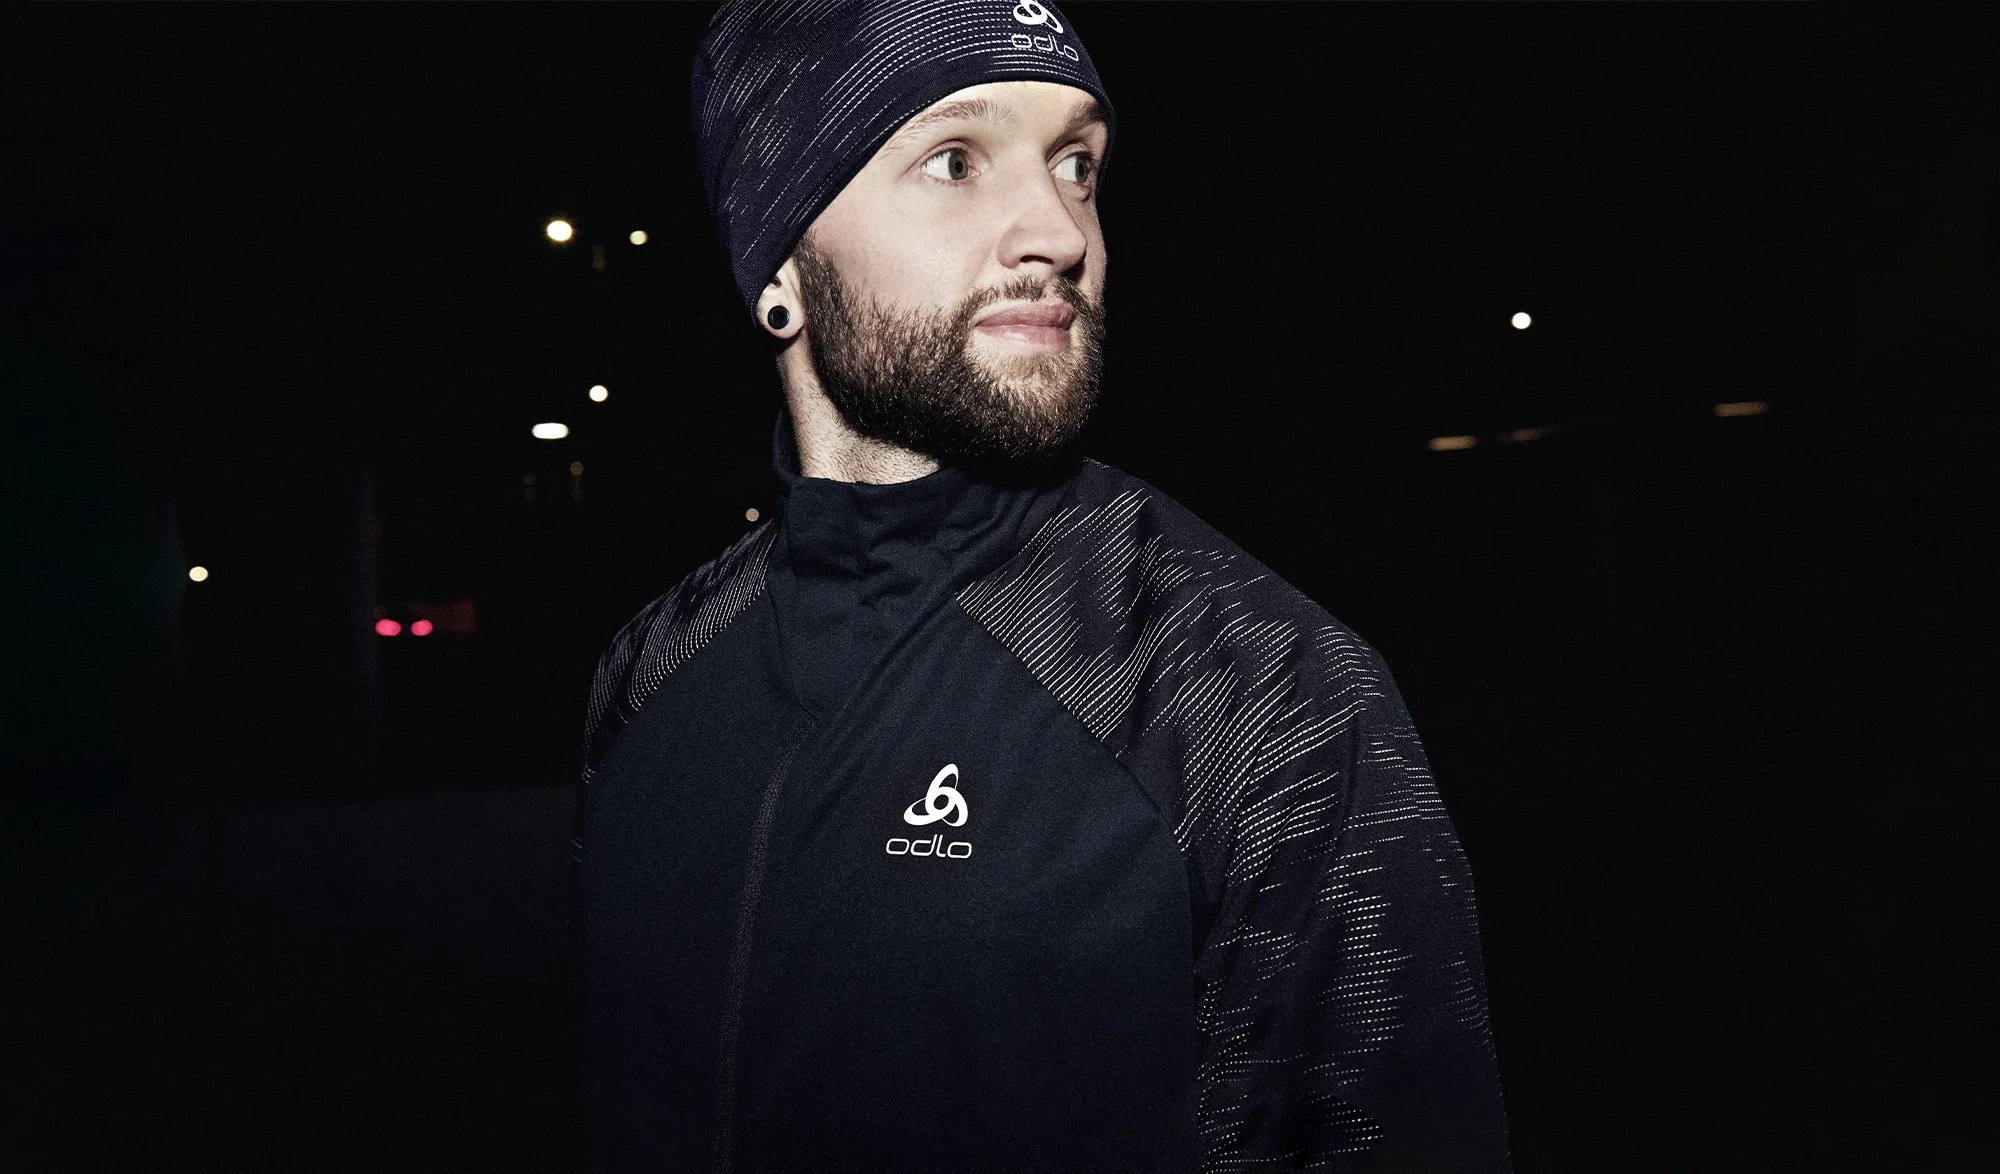 Jake Caterall - Odlo reflective collection